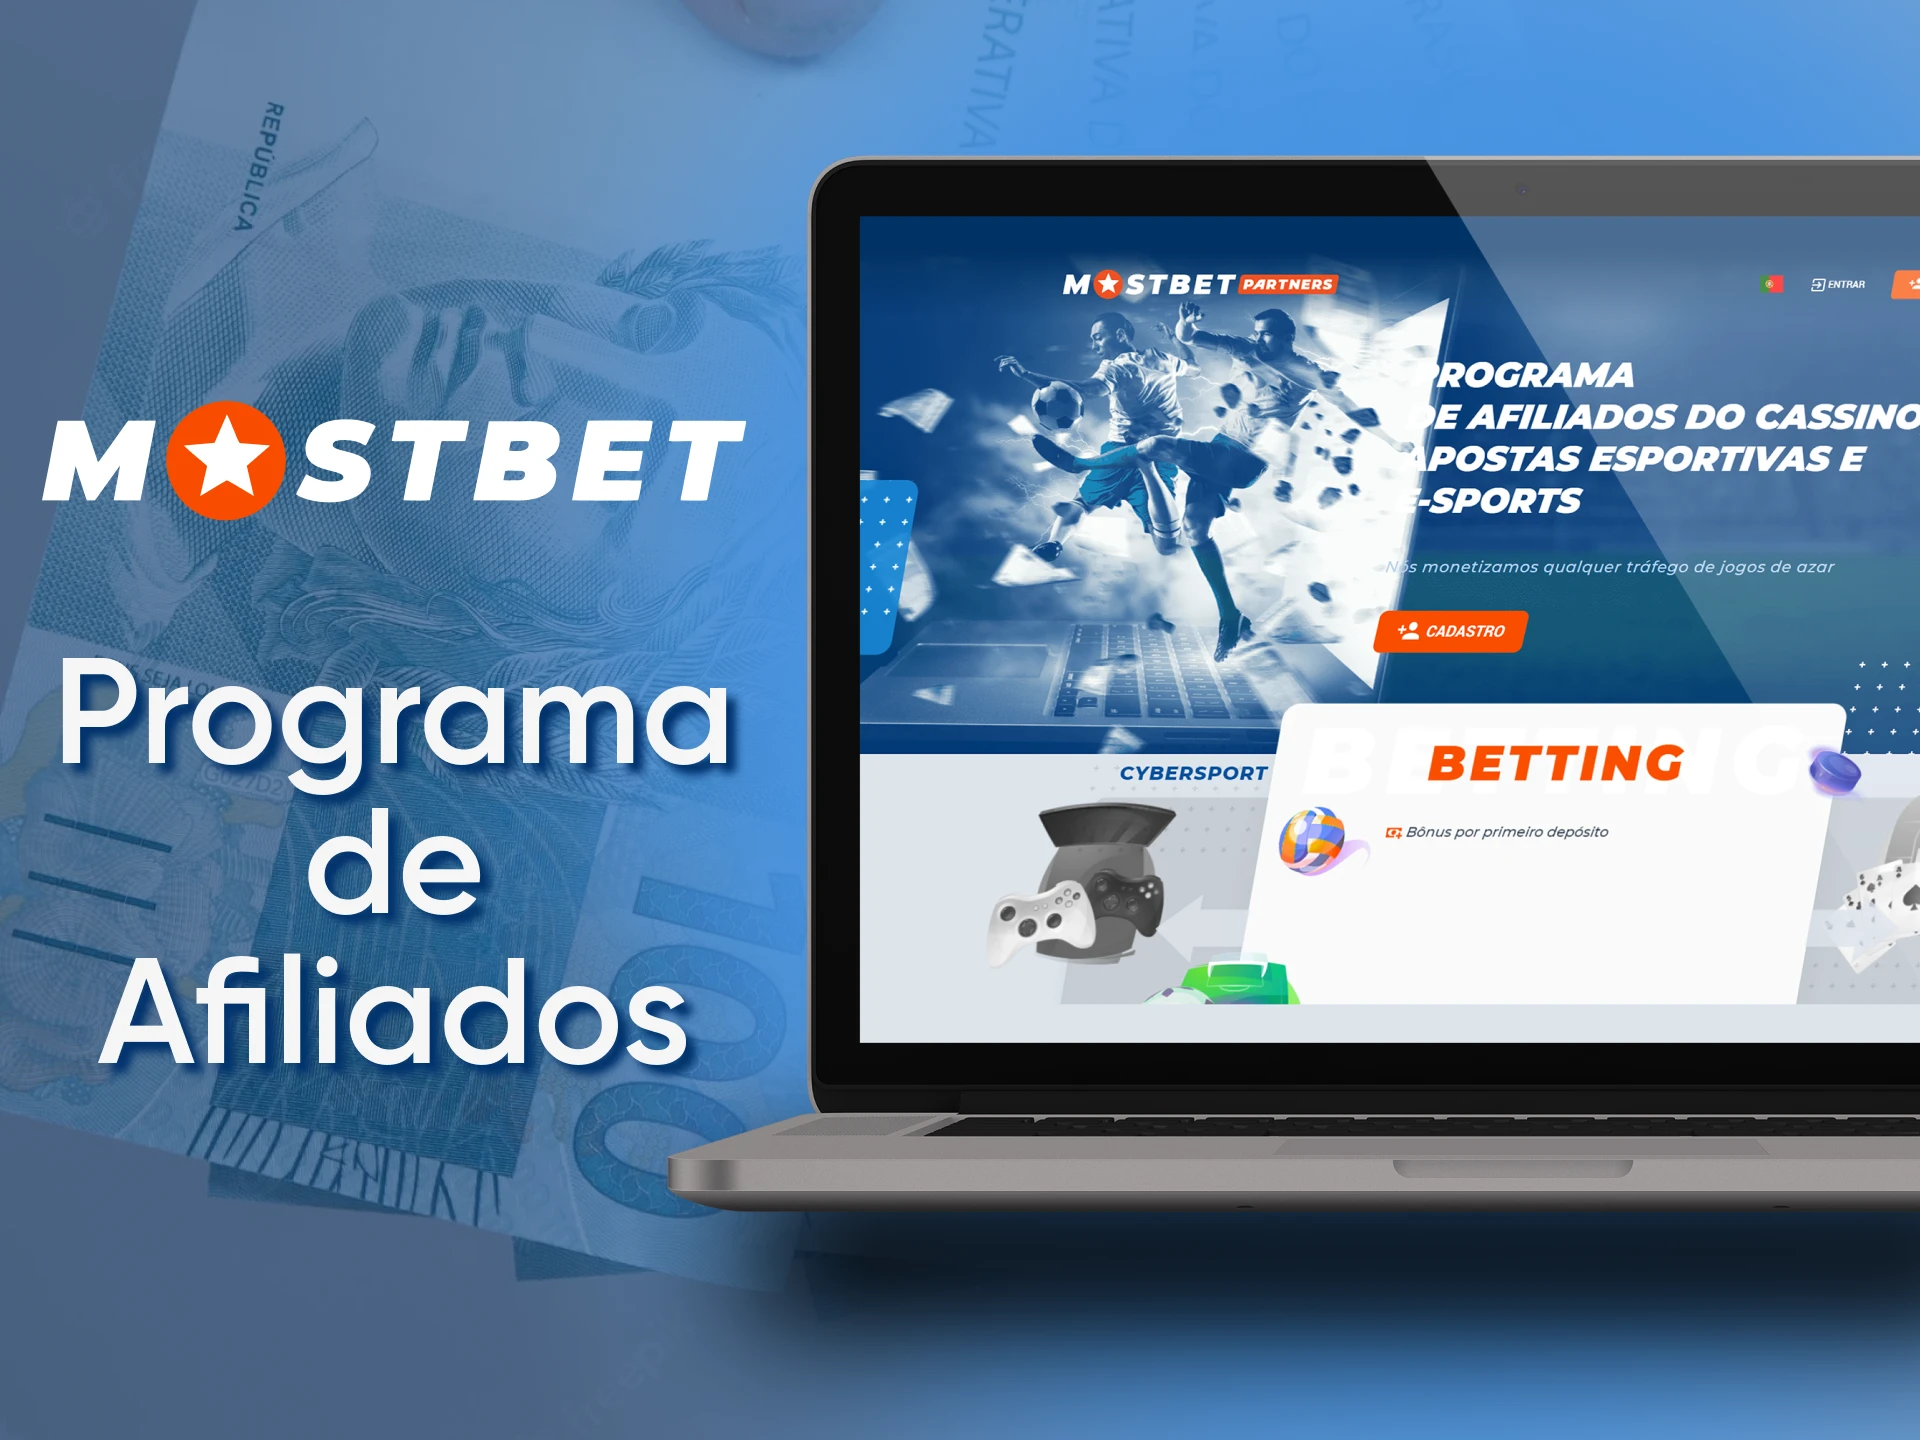 Become a Mostbet partner and you will get many benefits for sports betting, casino, eSports.